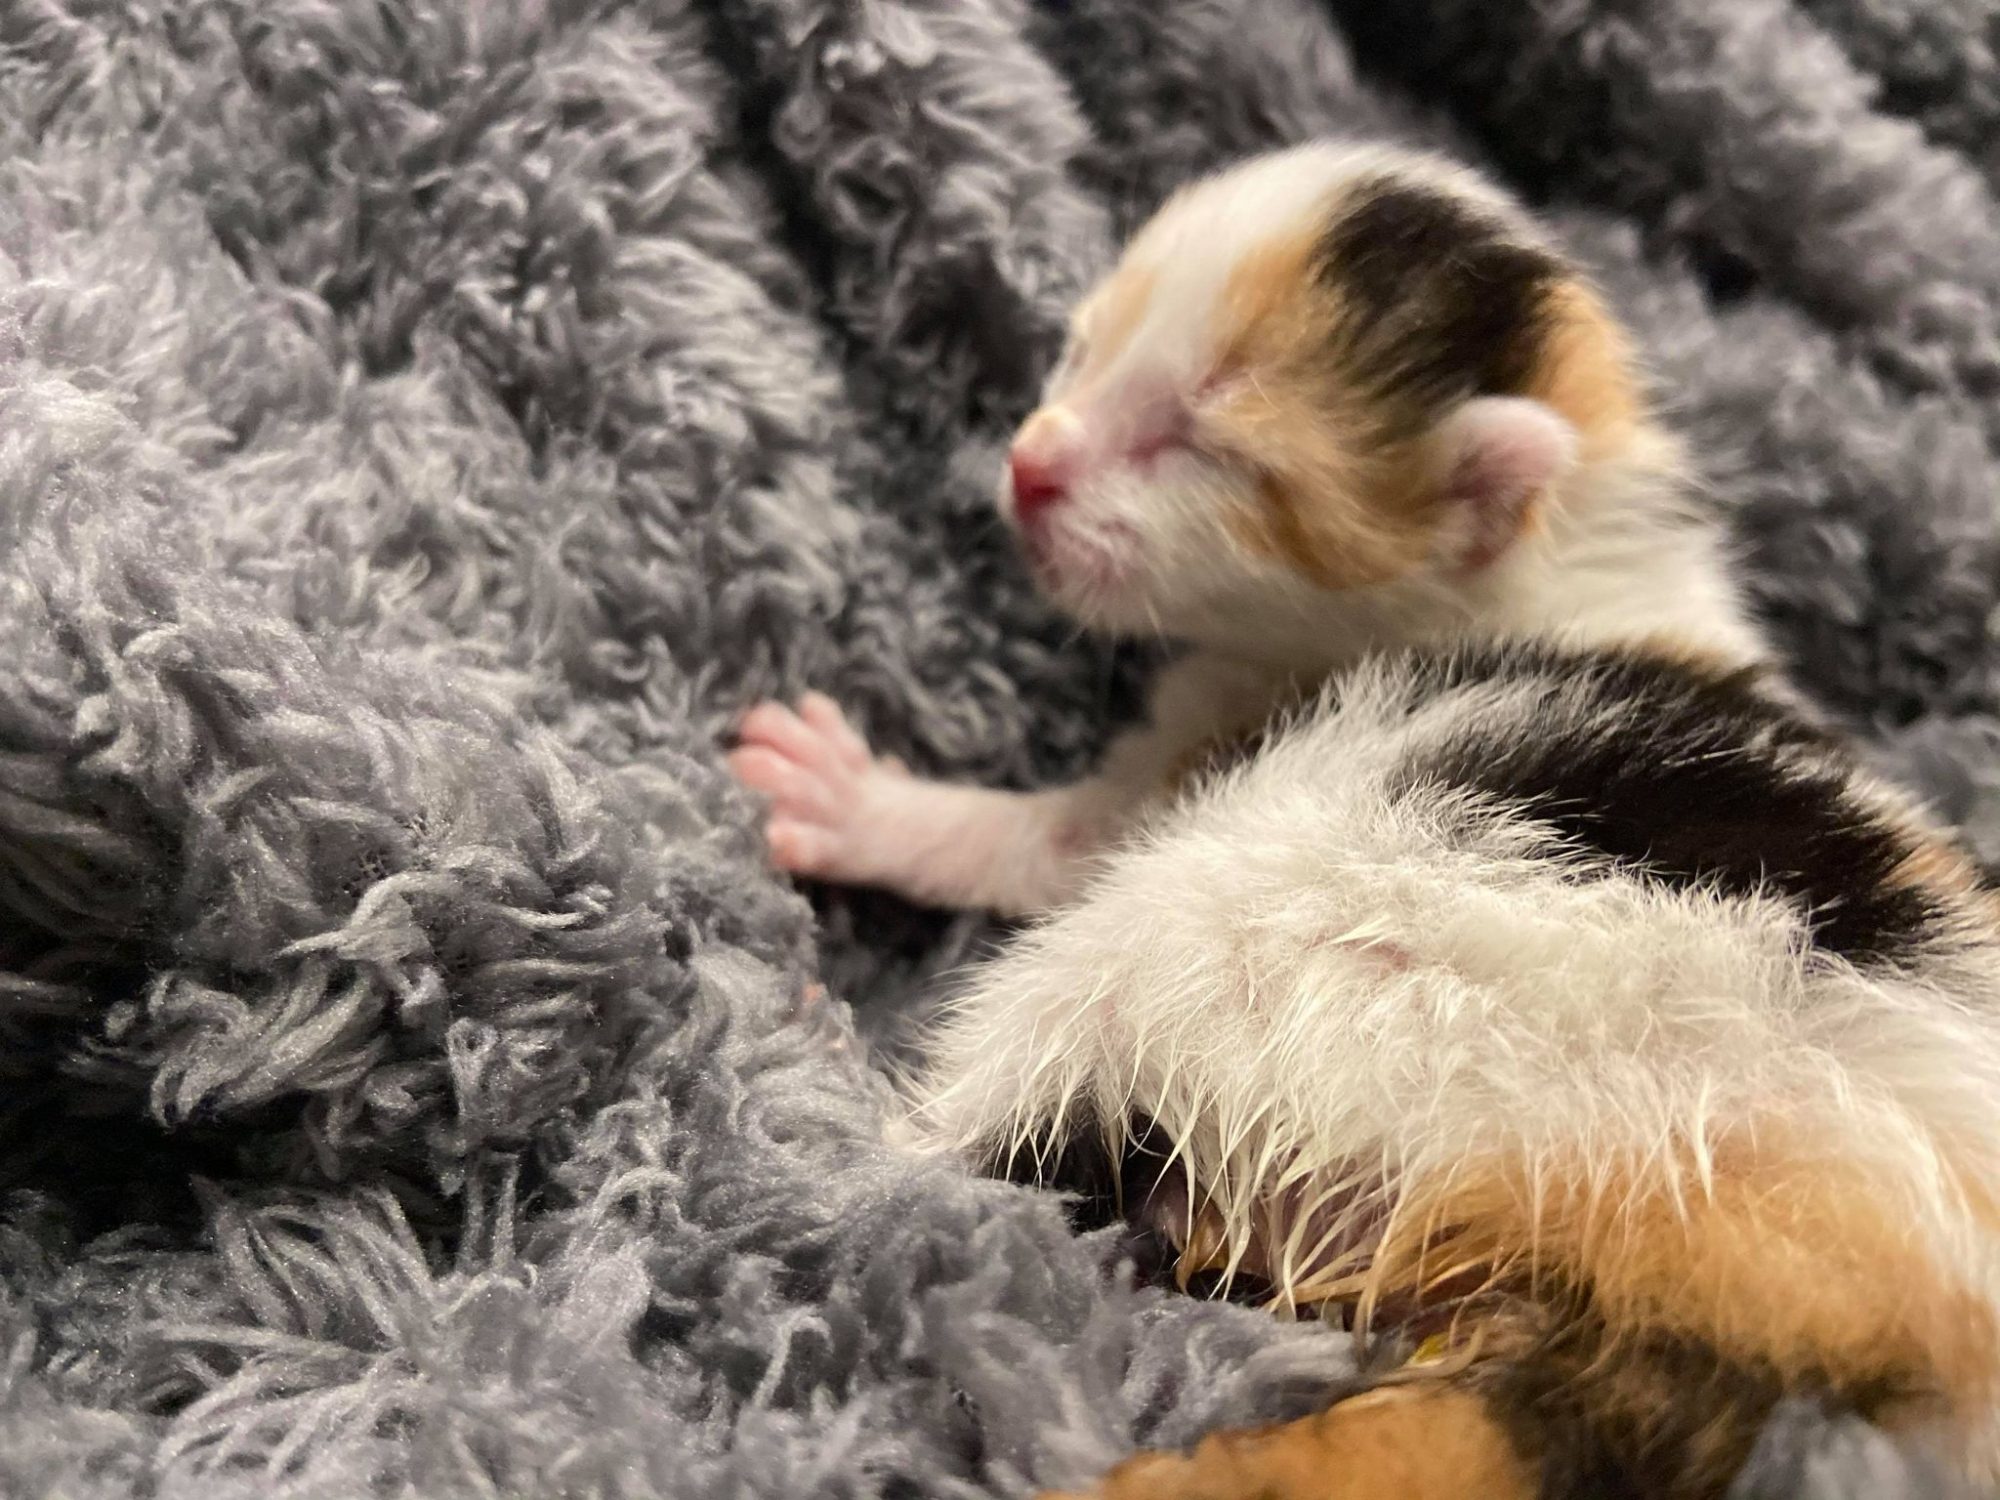 Shirley, who came into Independent Cat Rescue at 3 days old with her sister, Maude. Photo CredIt: Ashlea Franks, used with permission.